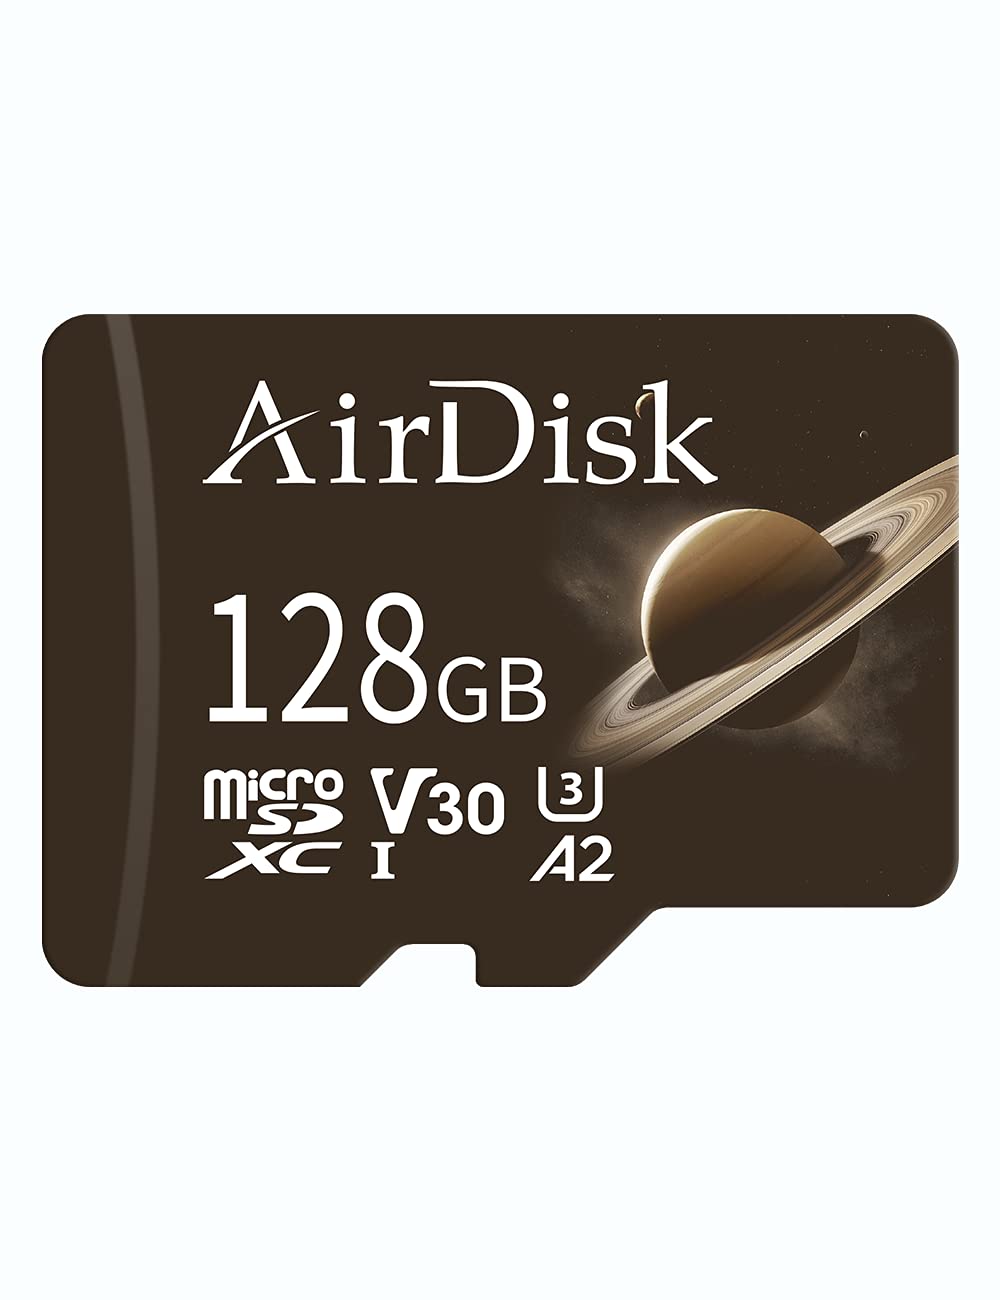 AIRDISK 128GB Micro SD Card, microSDXC UHS-I Flash Memory Card with Adapter - Up to 100MB/s, A2, U3, V30, Class10, High Speed TF Card